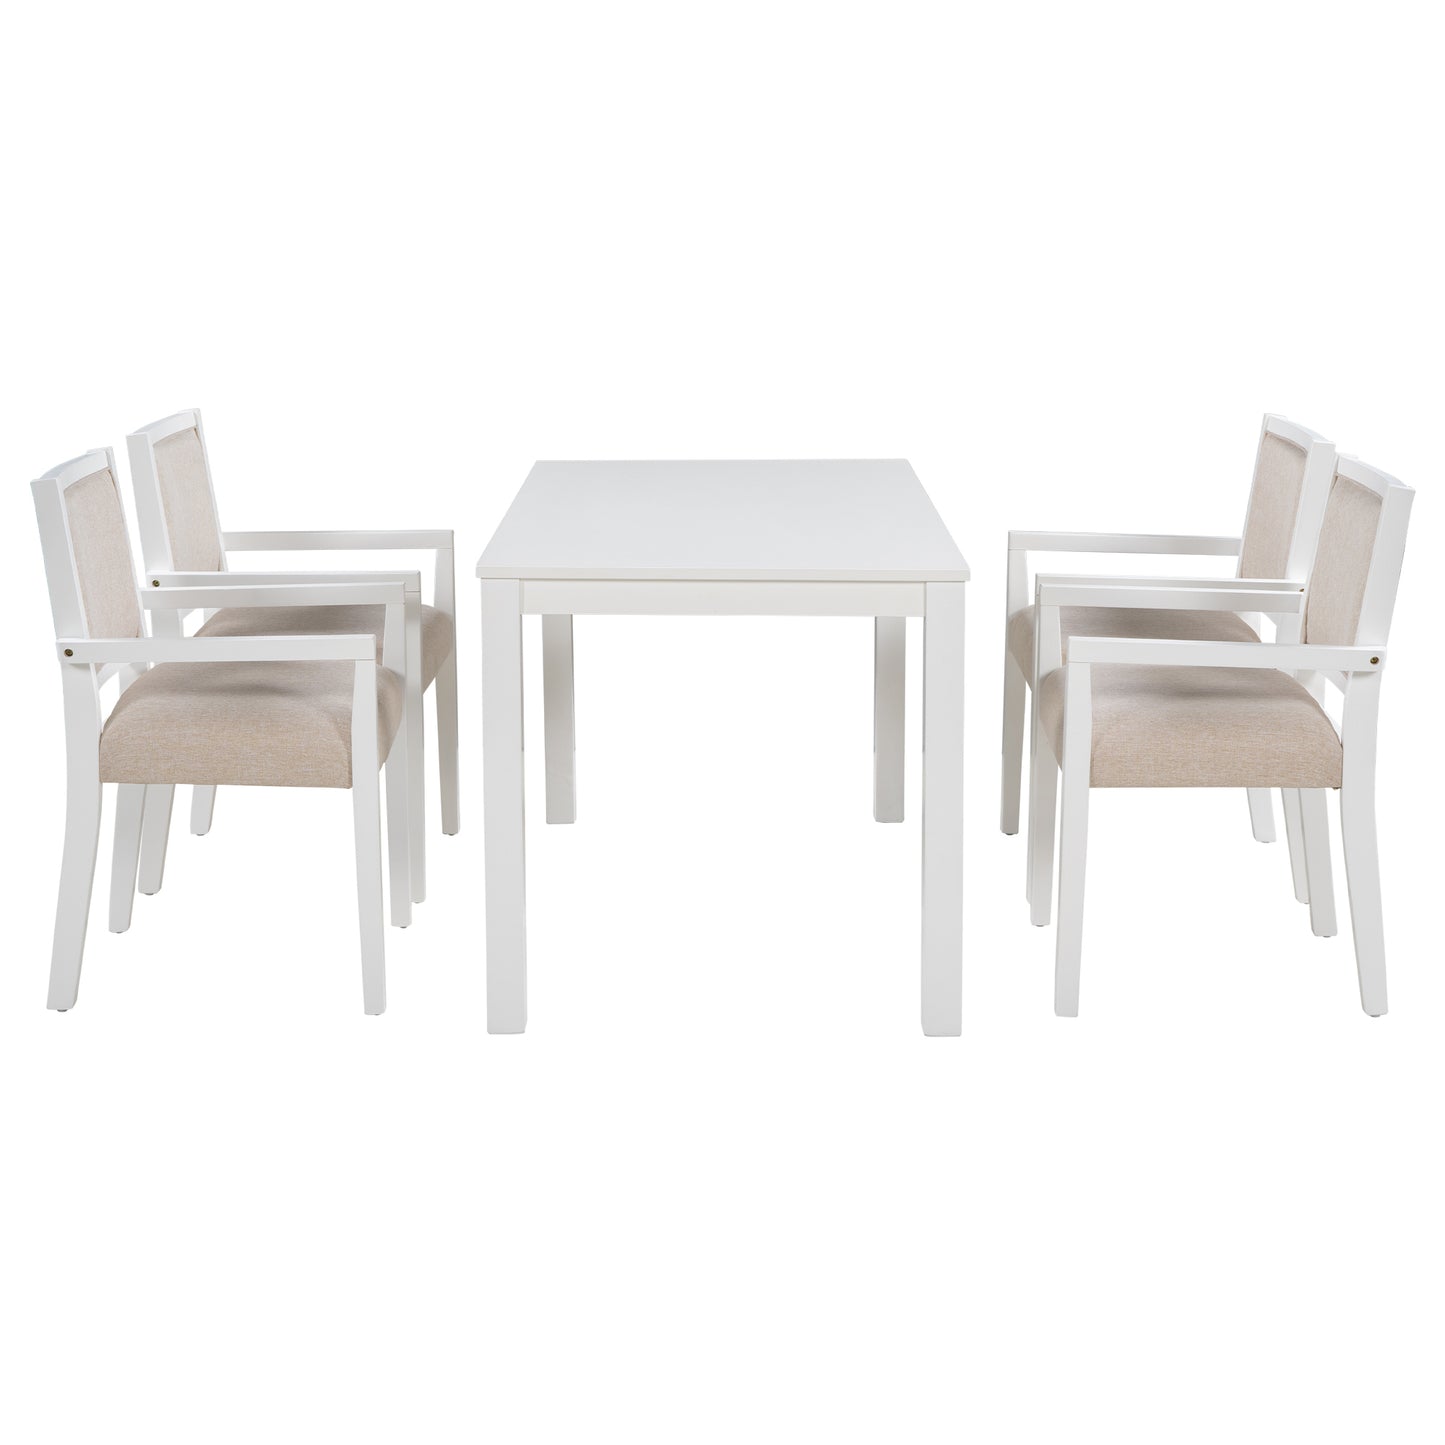 1st Choice Timeless Elegance: 5-Piece Dining Table Set with Upholstered Arm Chairs